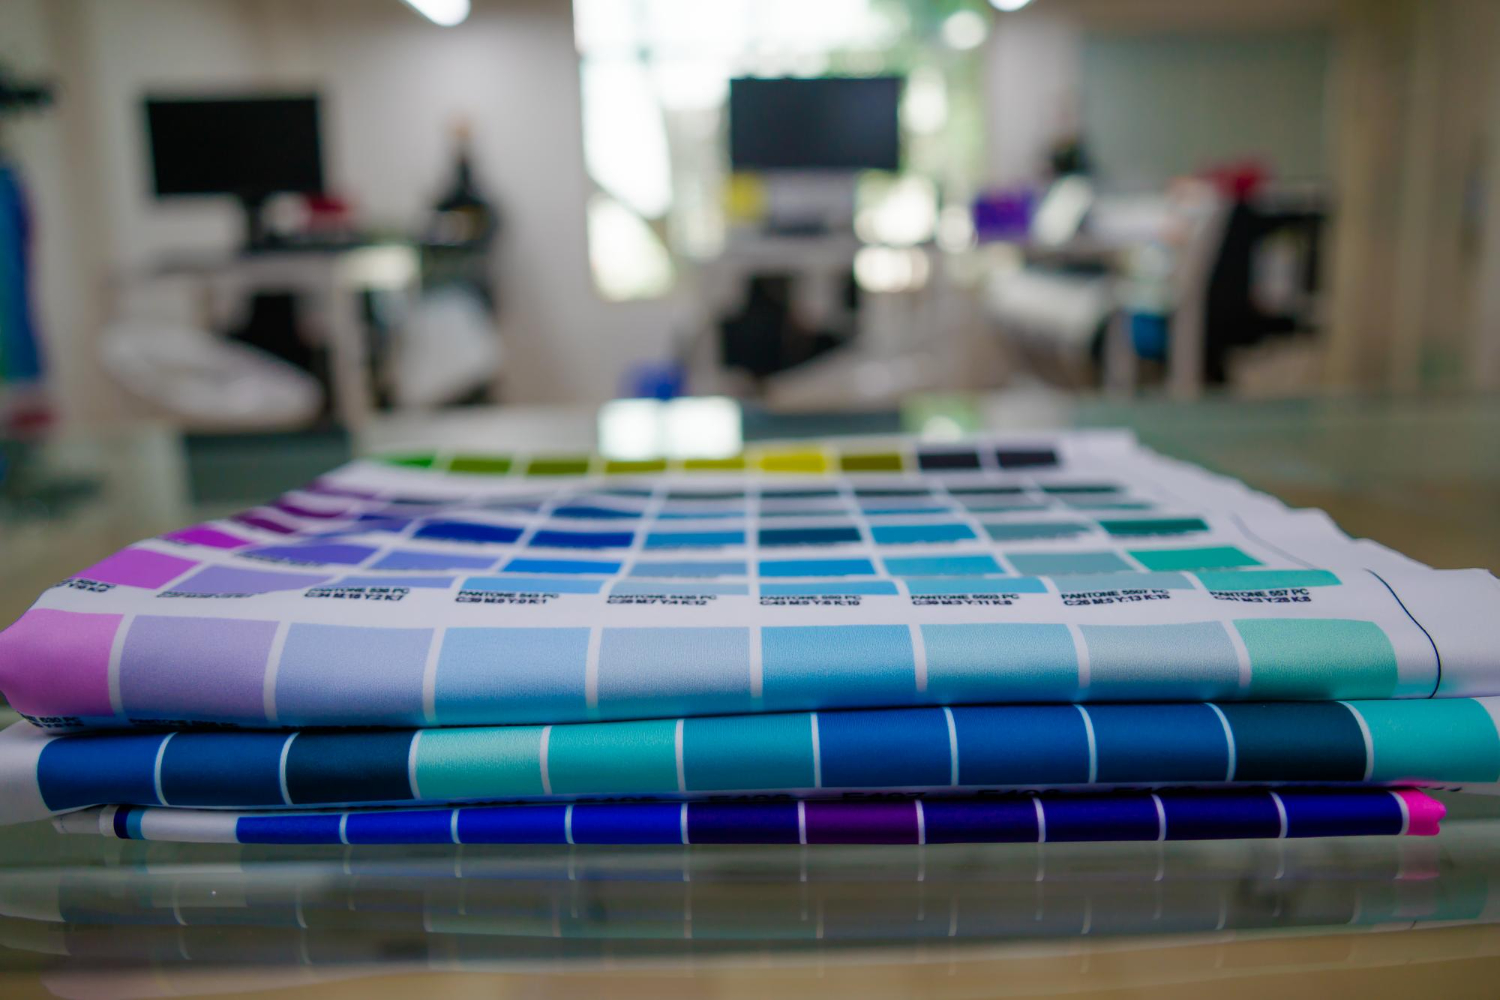 Printed fabrics with color scales, testing colors for sublimation printing.